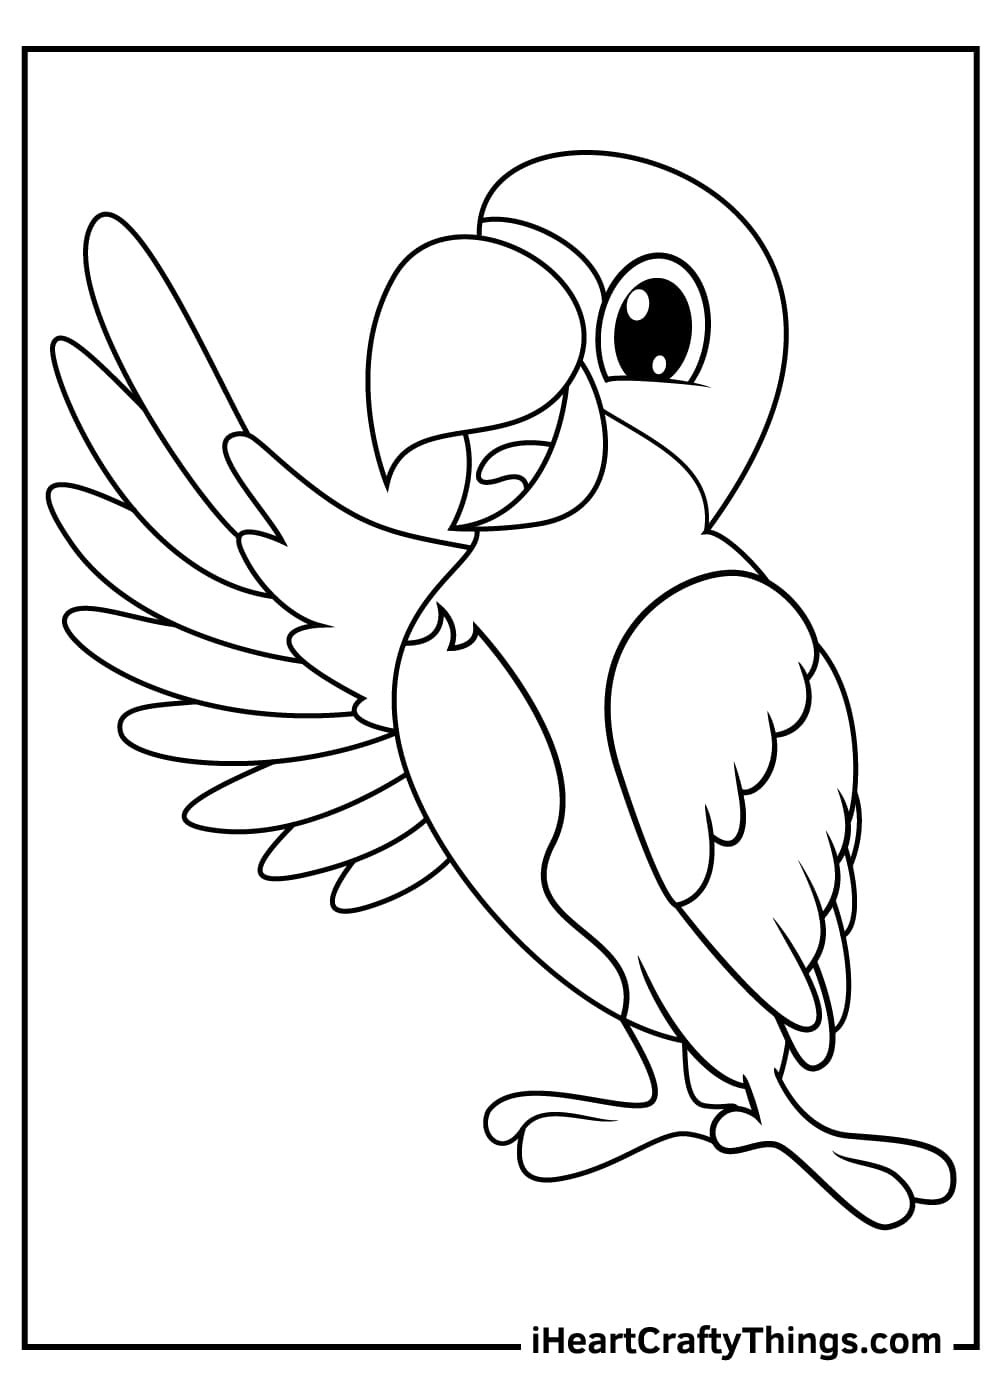 Free Parrot Coloring Page